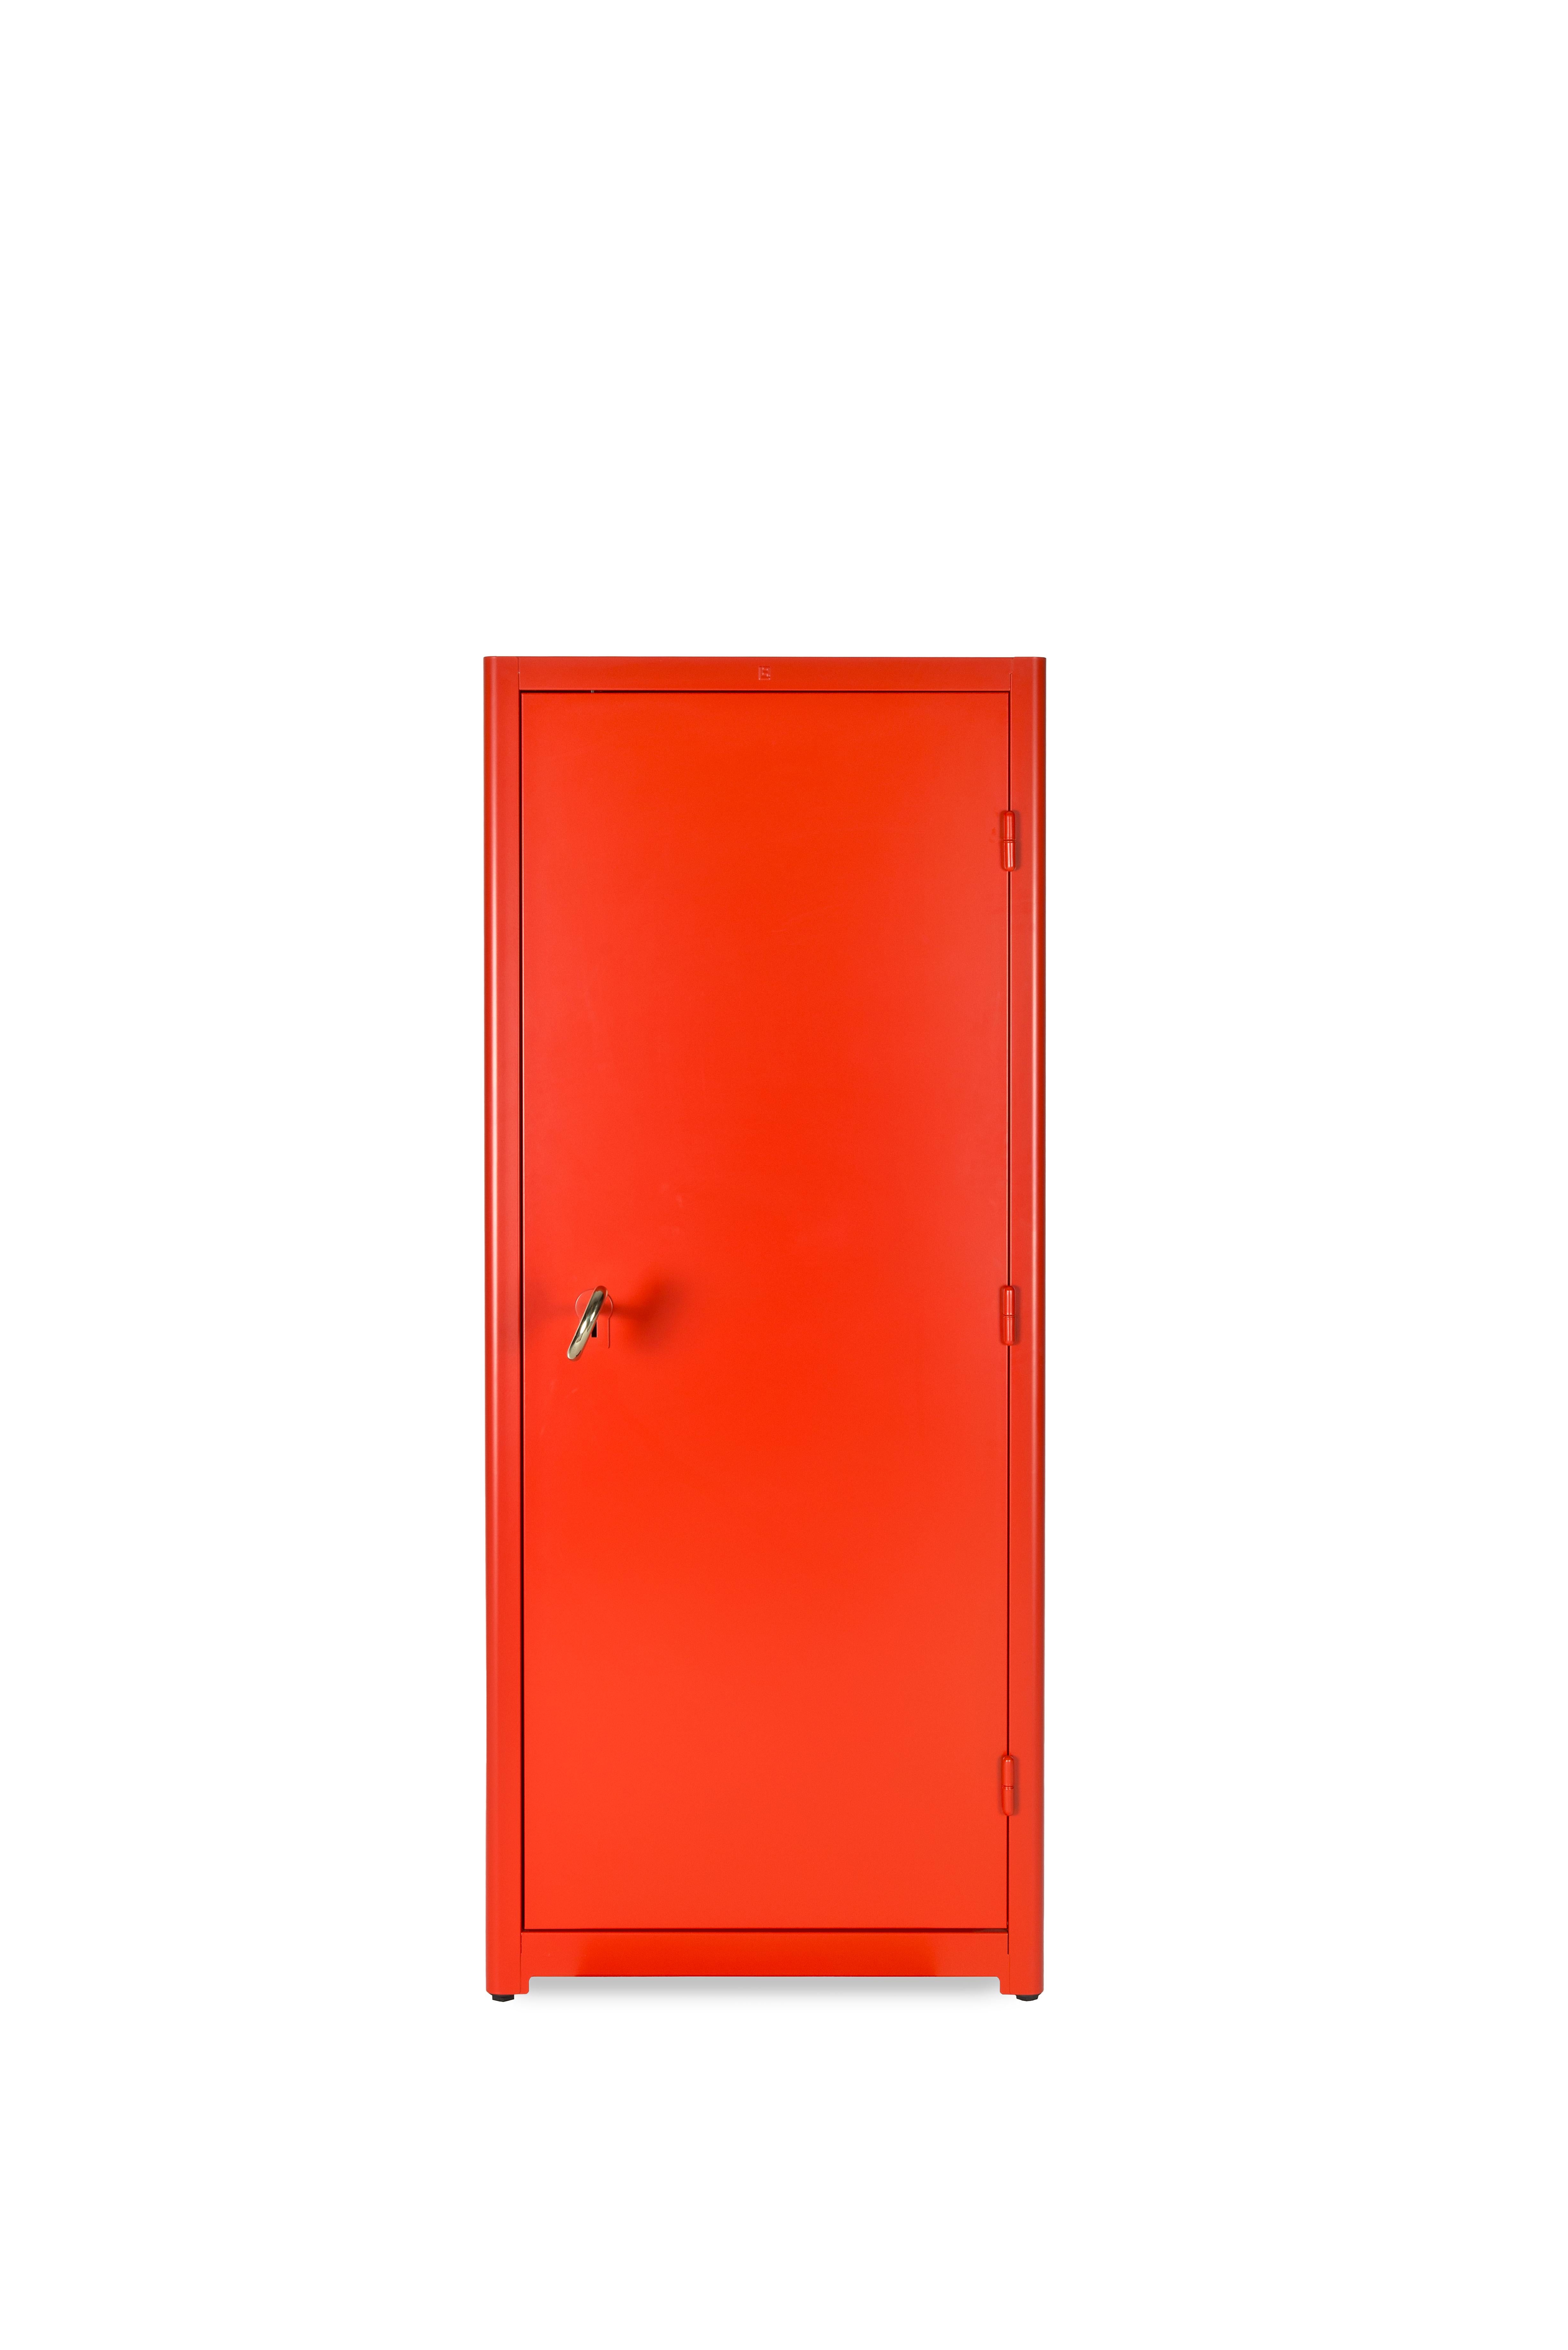 Cabinet

Lensvelt Job cabinet red, an archetype of the Classic storage cabinet designed by Studio Job, with a special twist. The case has a gigantic gold-colored key that gives the Alice in Wonderland feeling. The ingenious lock has been left